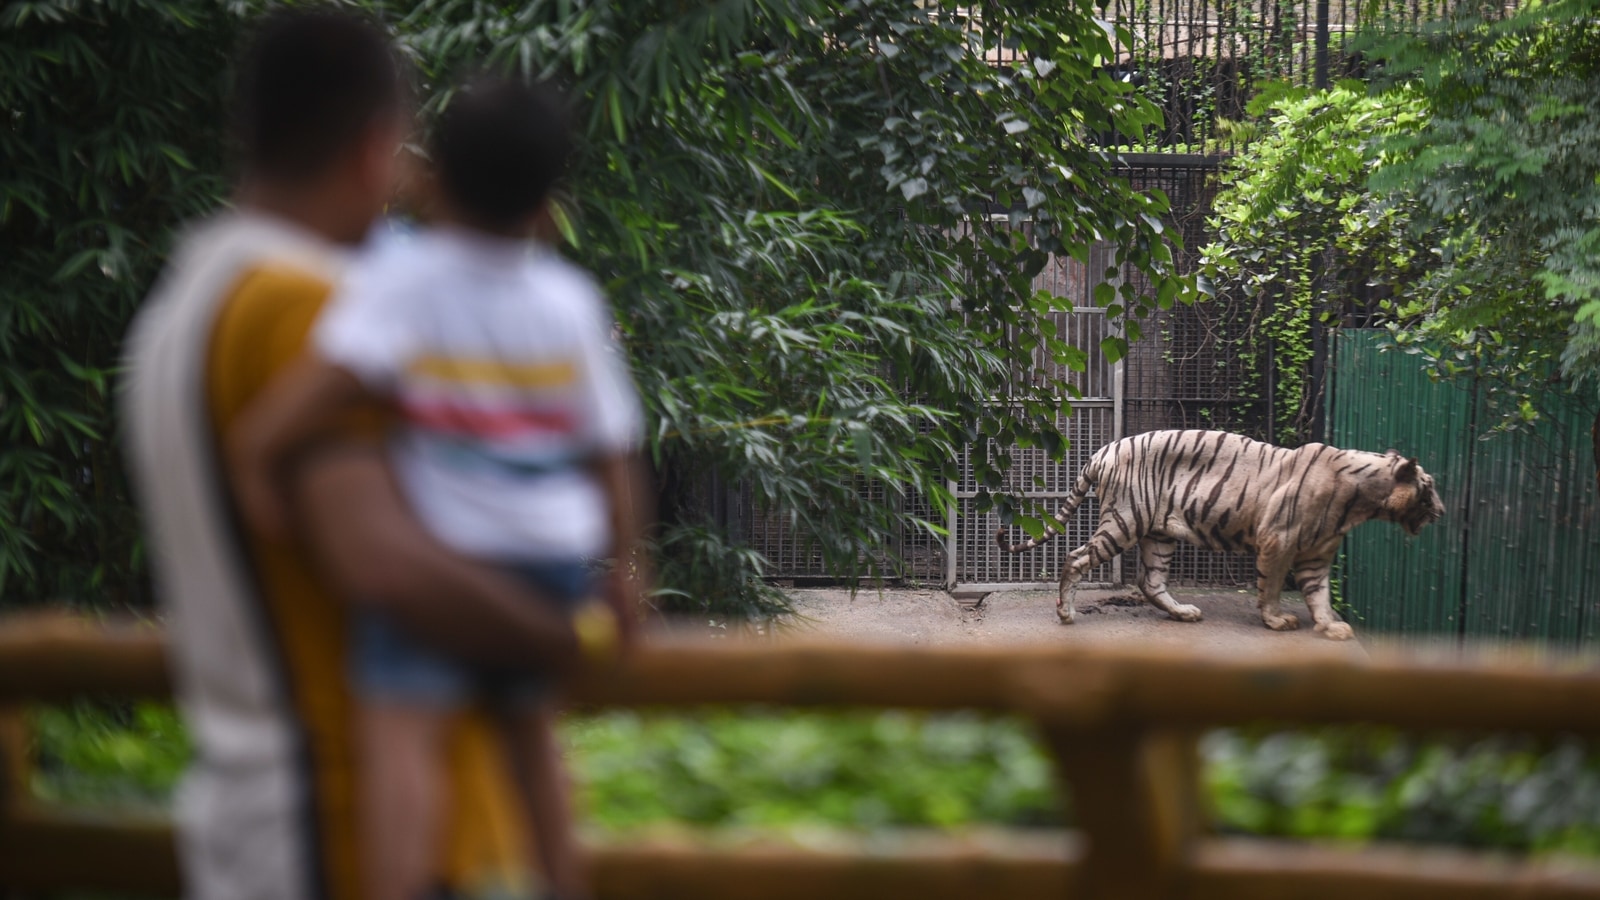 Over 2,500 turn up as Delhi zoo opens after three months Latest News